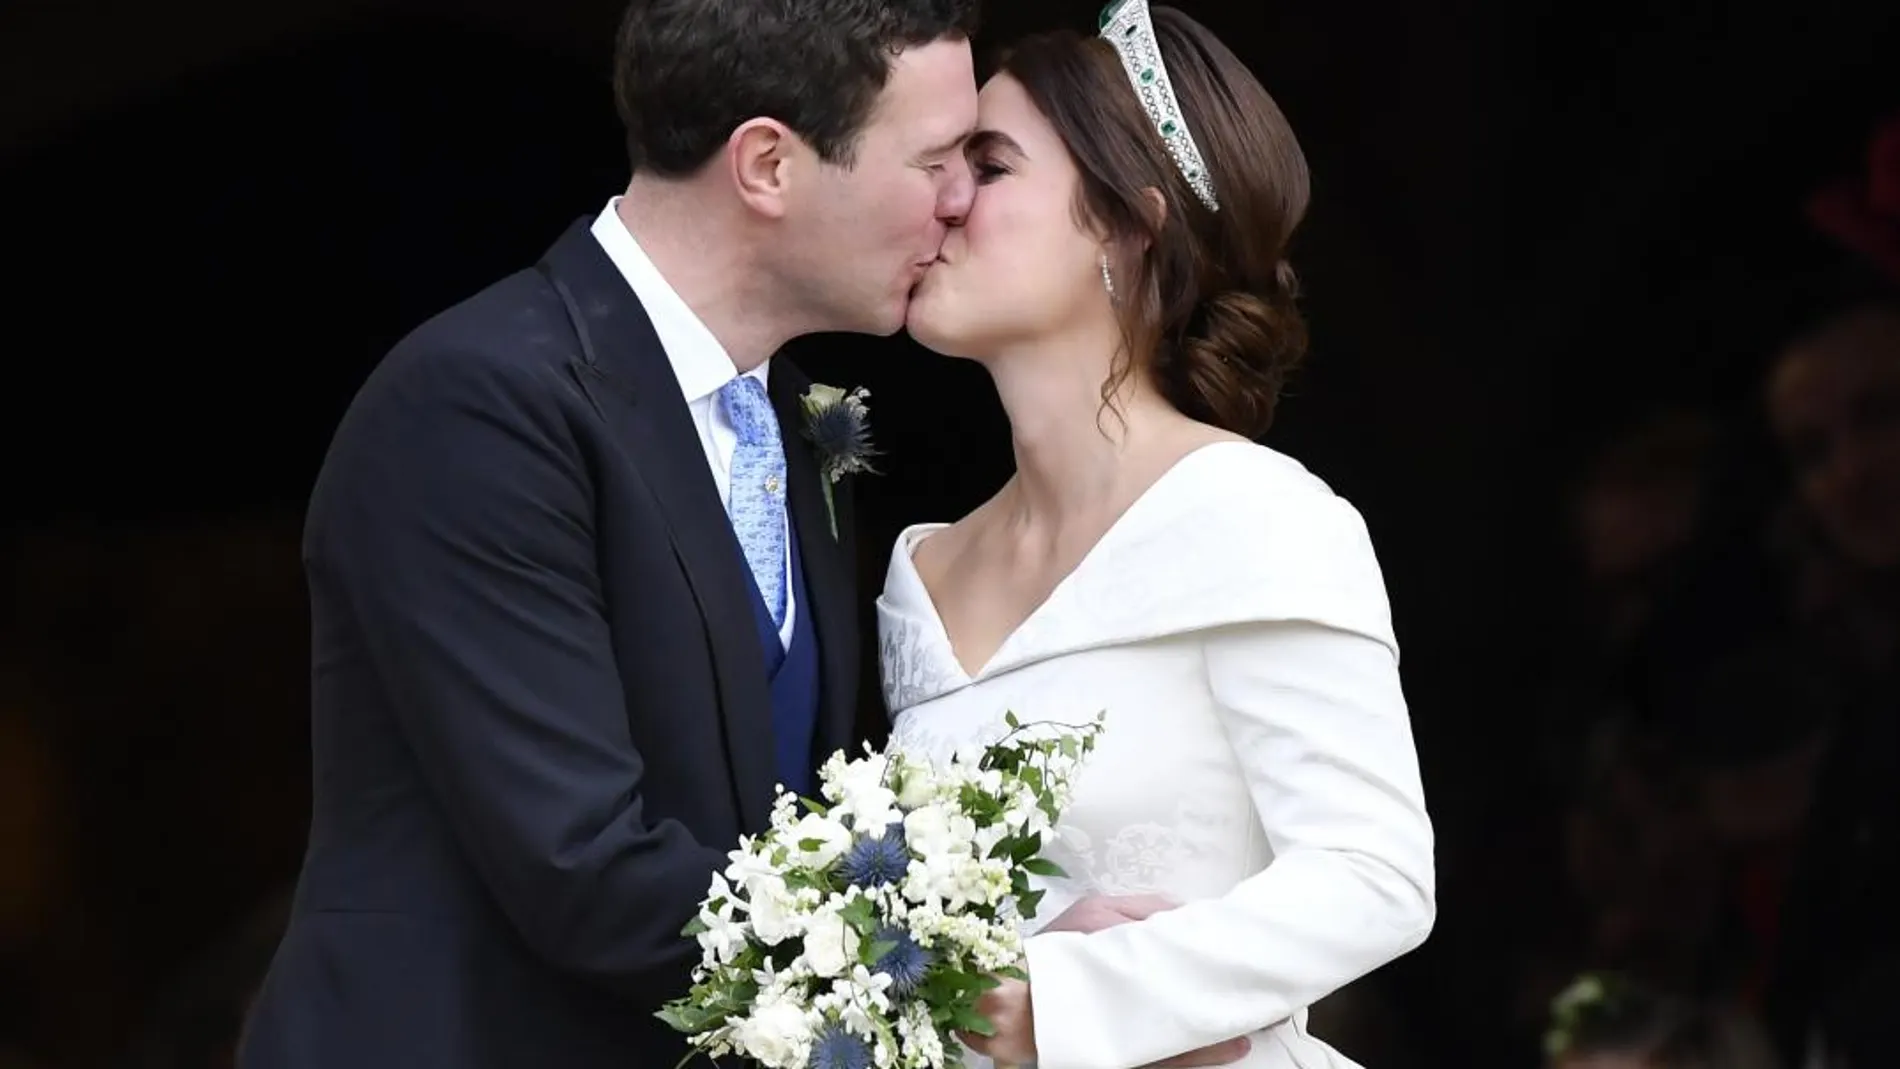 Princess Eugenie and Jack Brooksbank kiss after their wedding at St Georgeâ€™s Chapel, Windsor Castle, near London, England, Friday Oct. 12, 2018. (Toby Melville, Pool via AP)